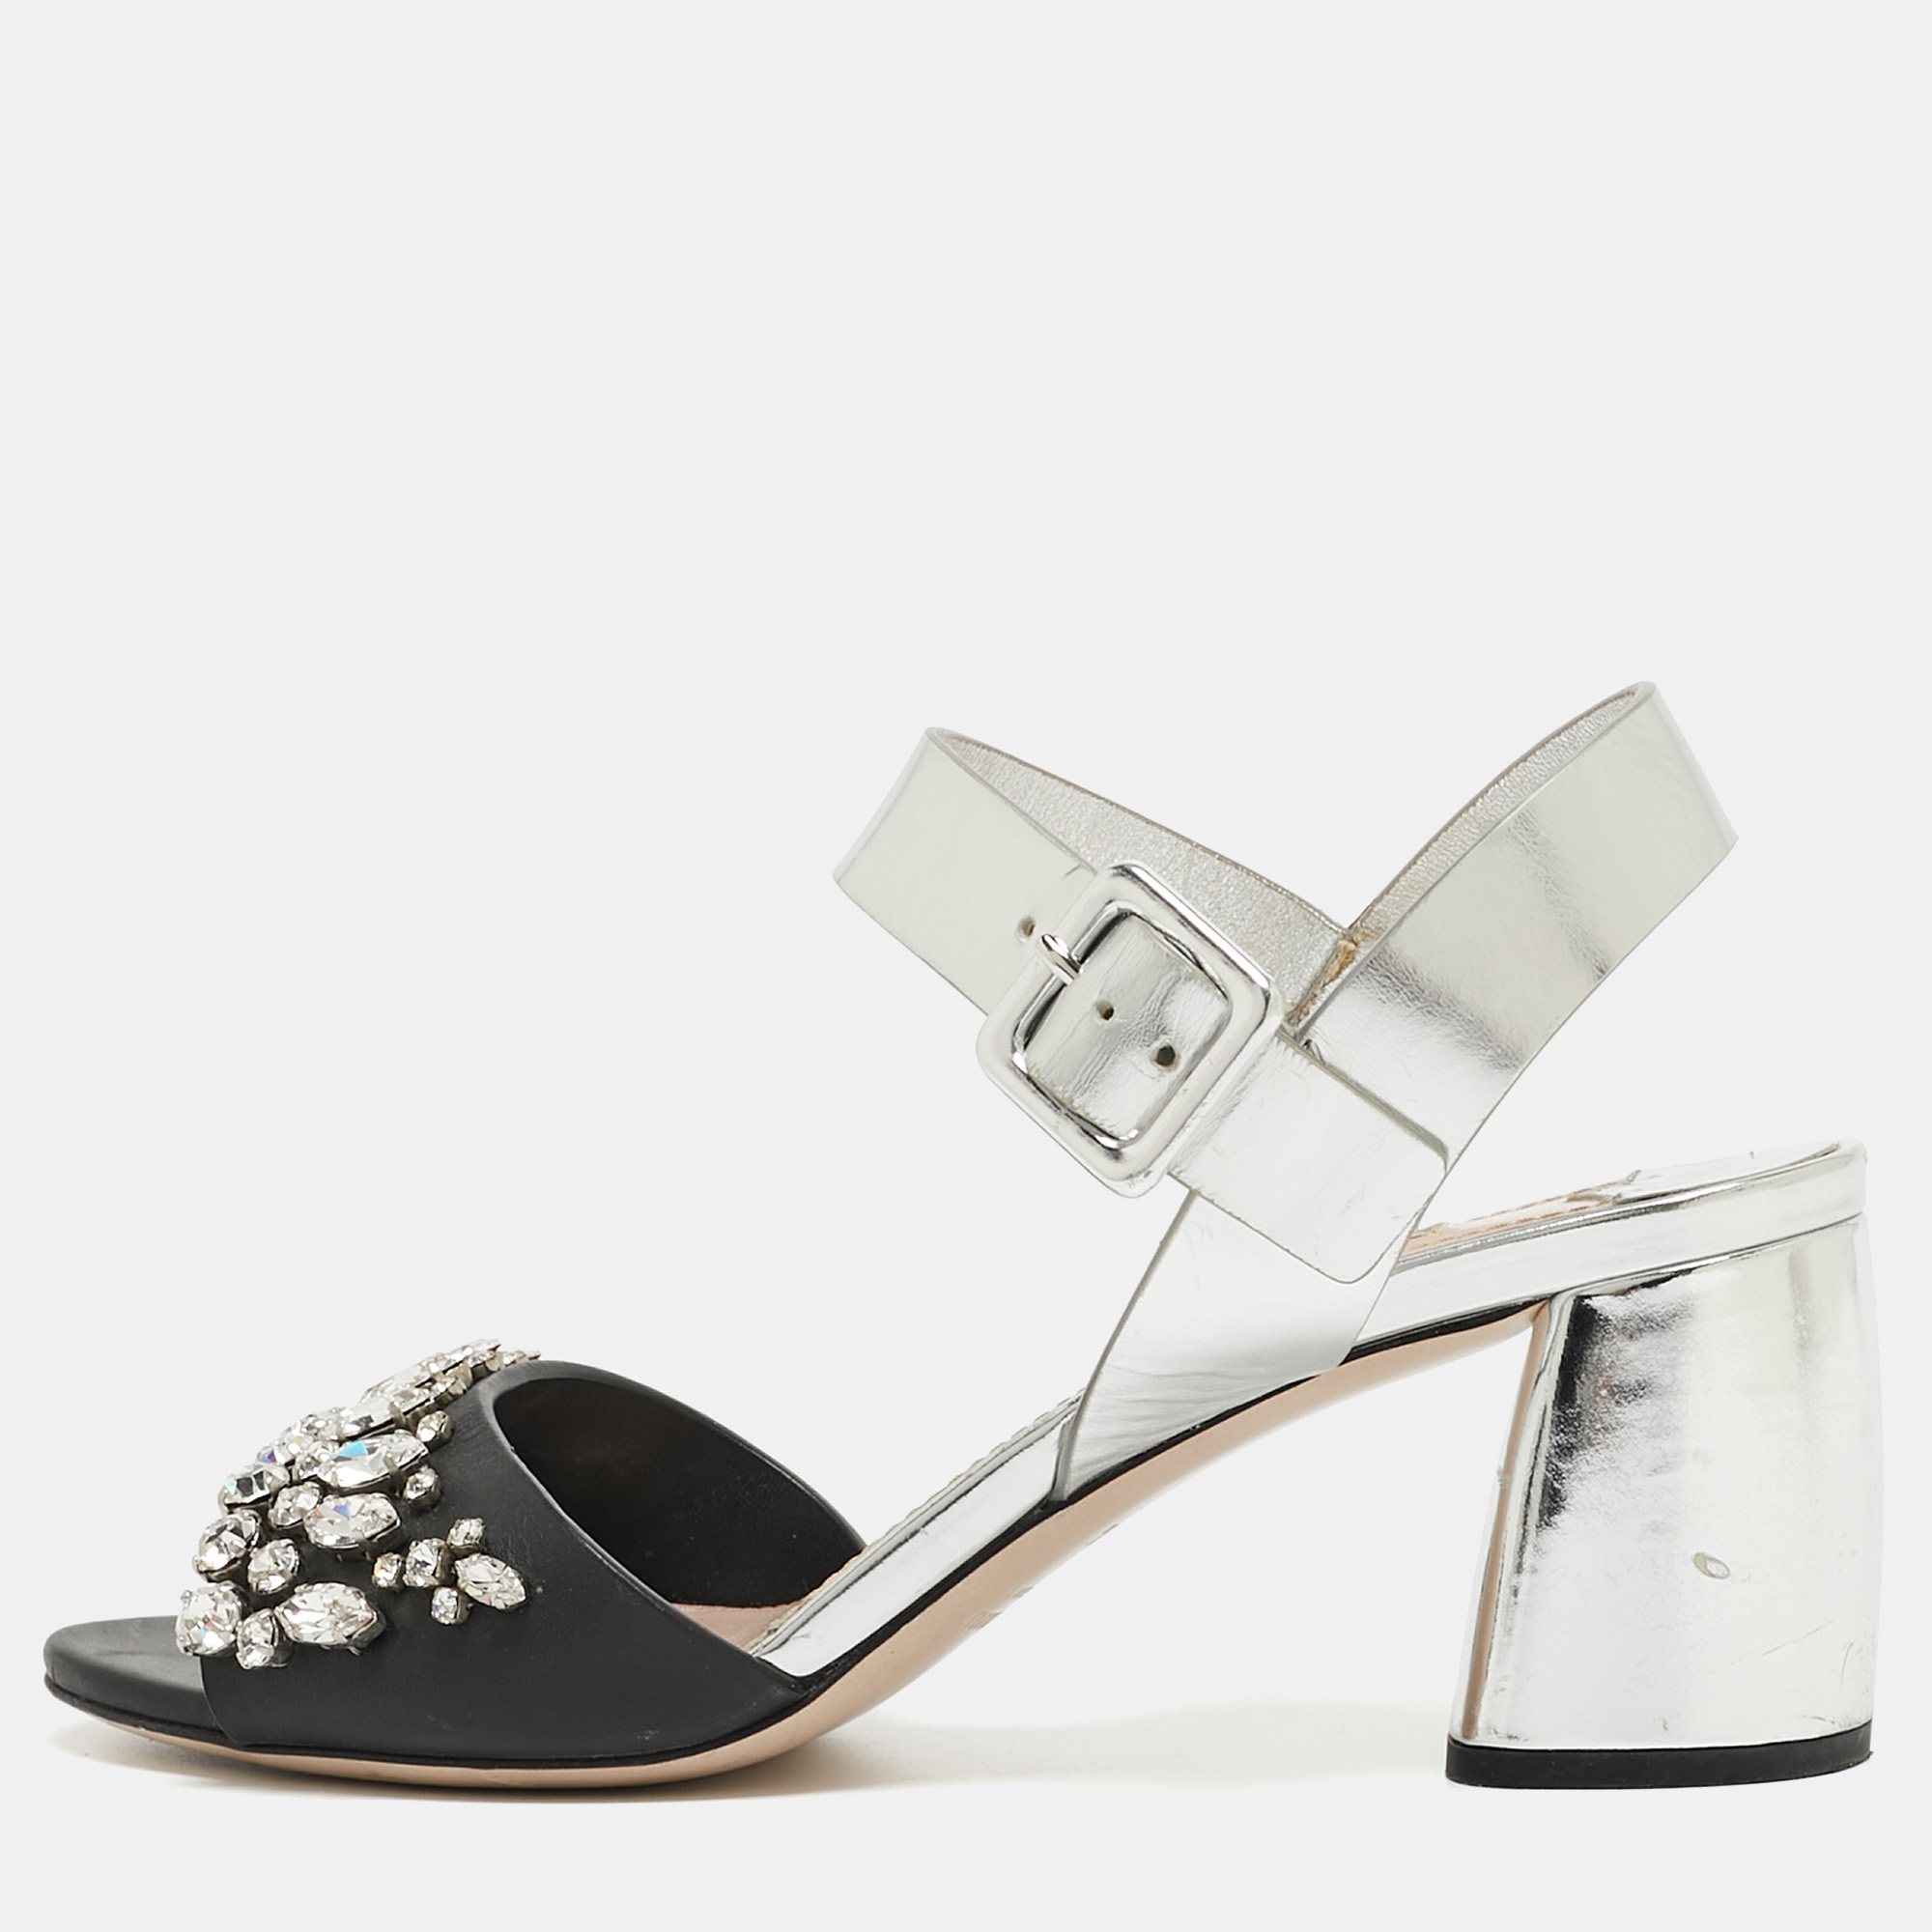 Pre-owned Miu Miu Silver/black Leather Crystal Embellished Ankle Strap Sandals Size 35.5